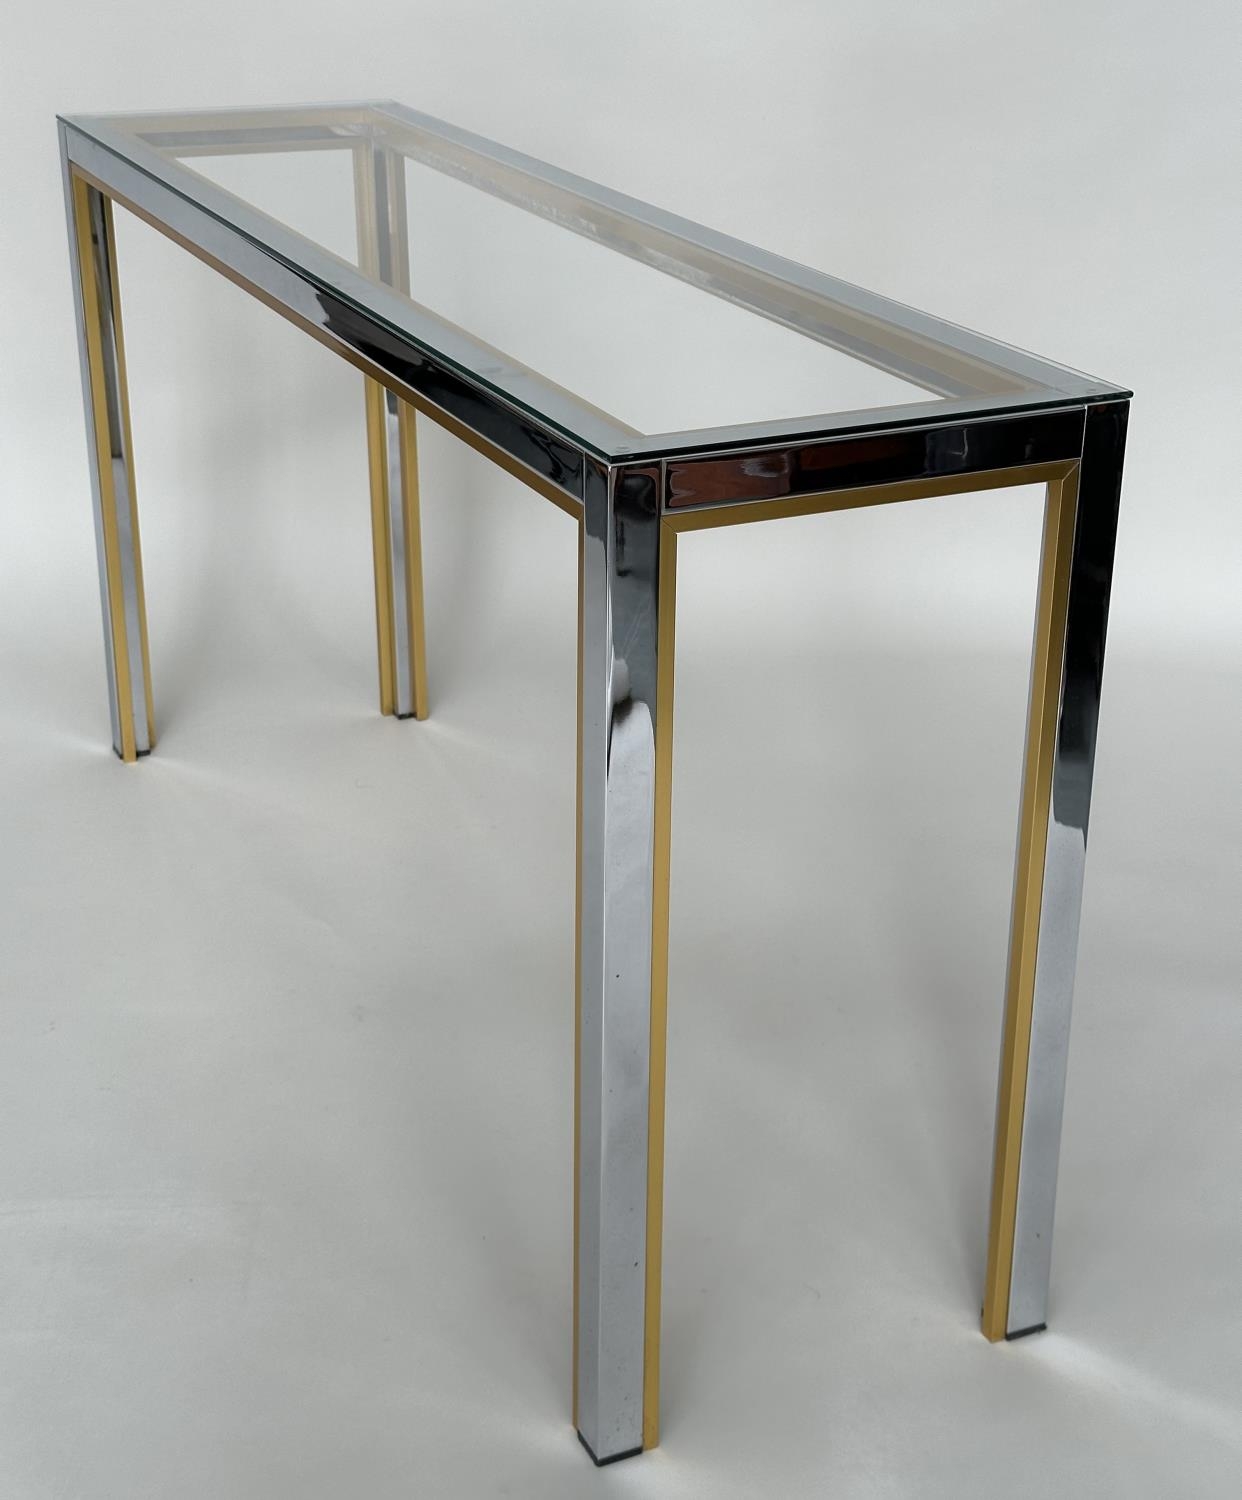 CONSOLE TABLE, 1970s Italian style brass and chrome framed rectangular plate glass, 135cm W x 72cm H - Image 6 of 8